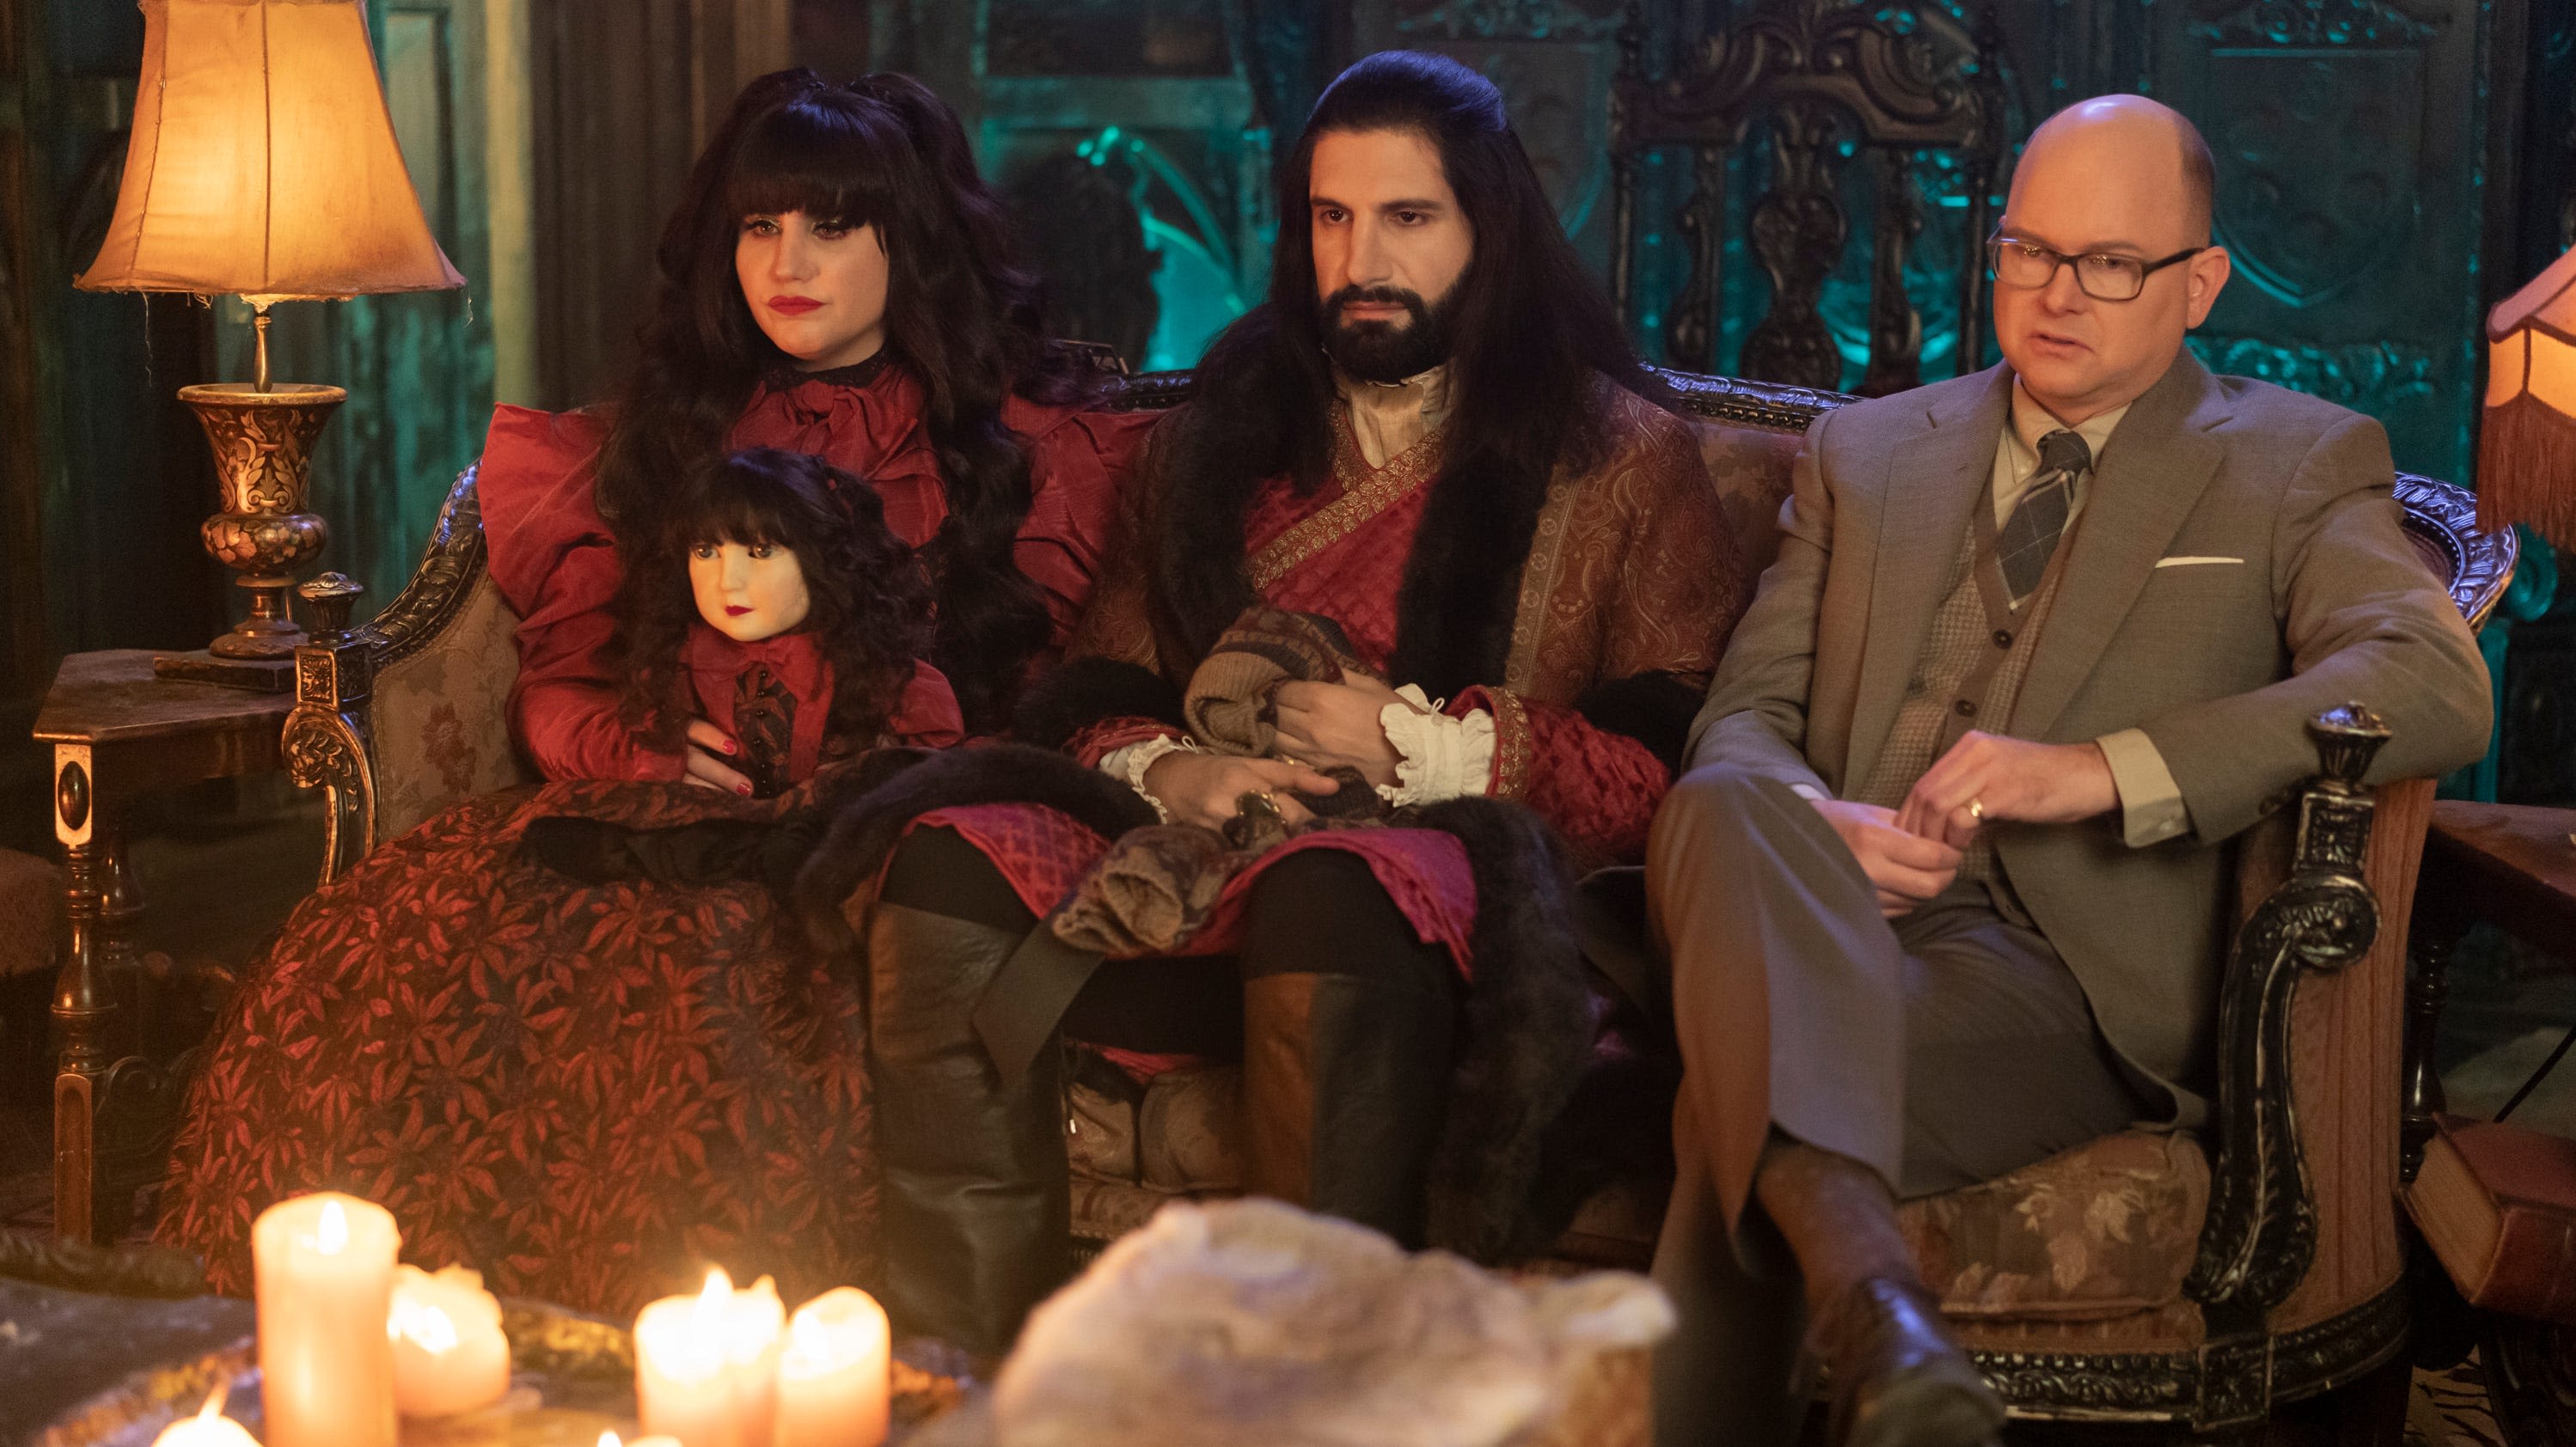 'What We Do in the Shadows' teases unfamiliar final season